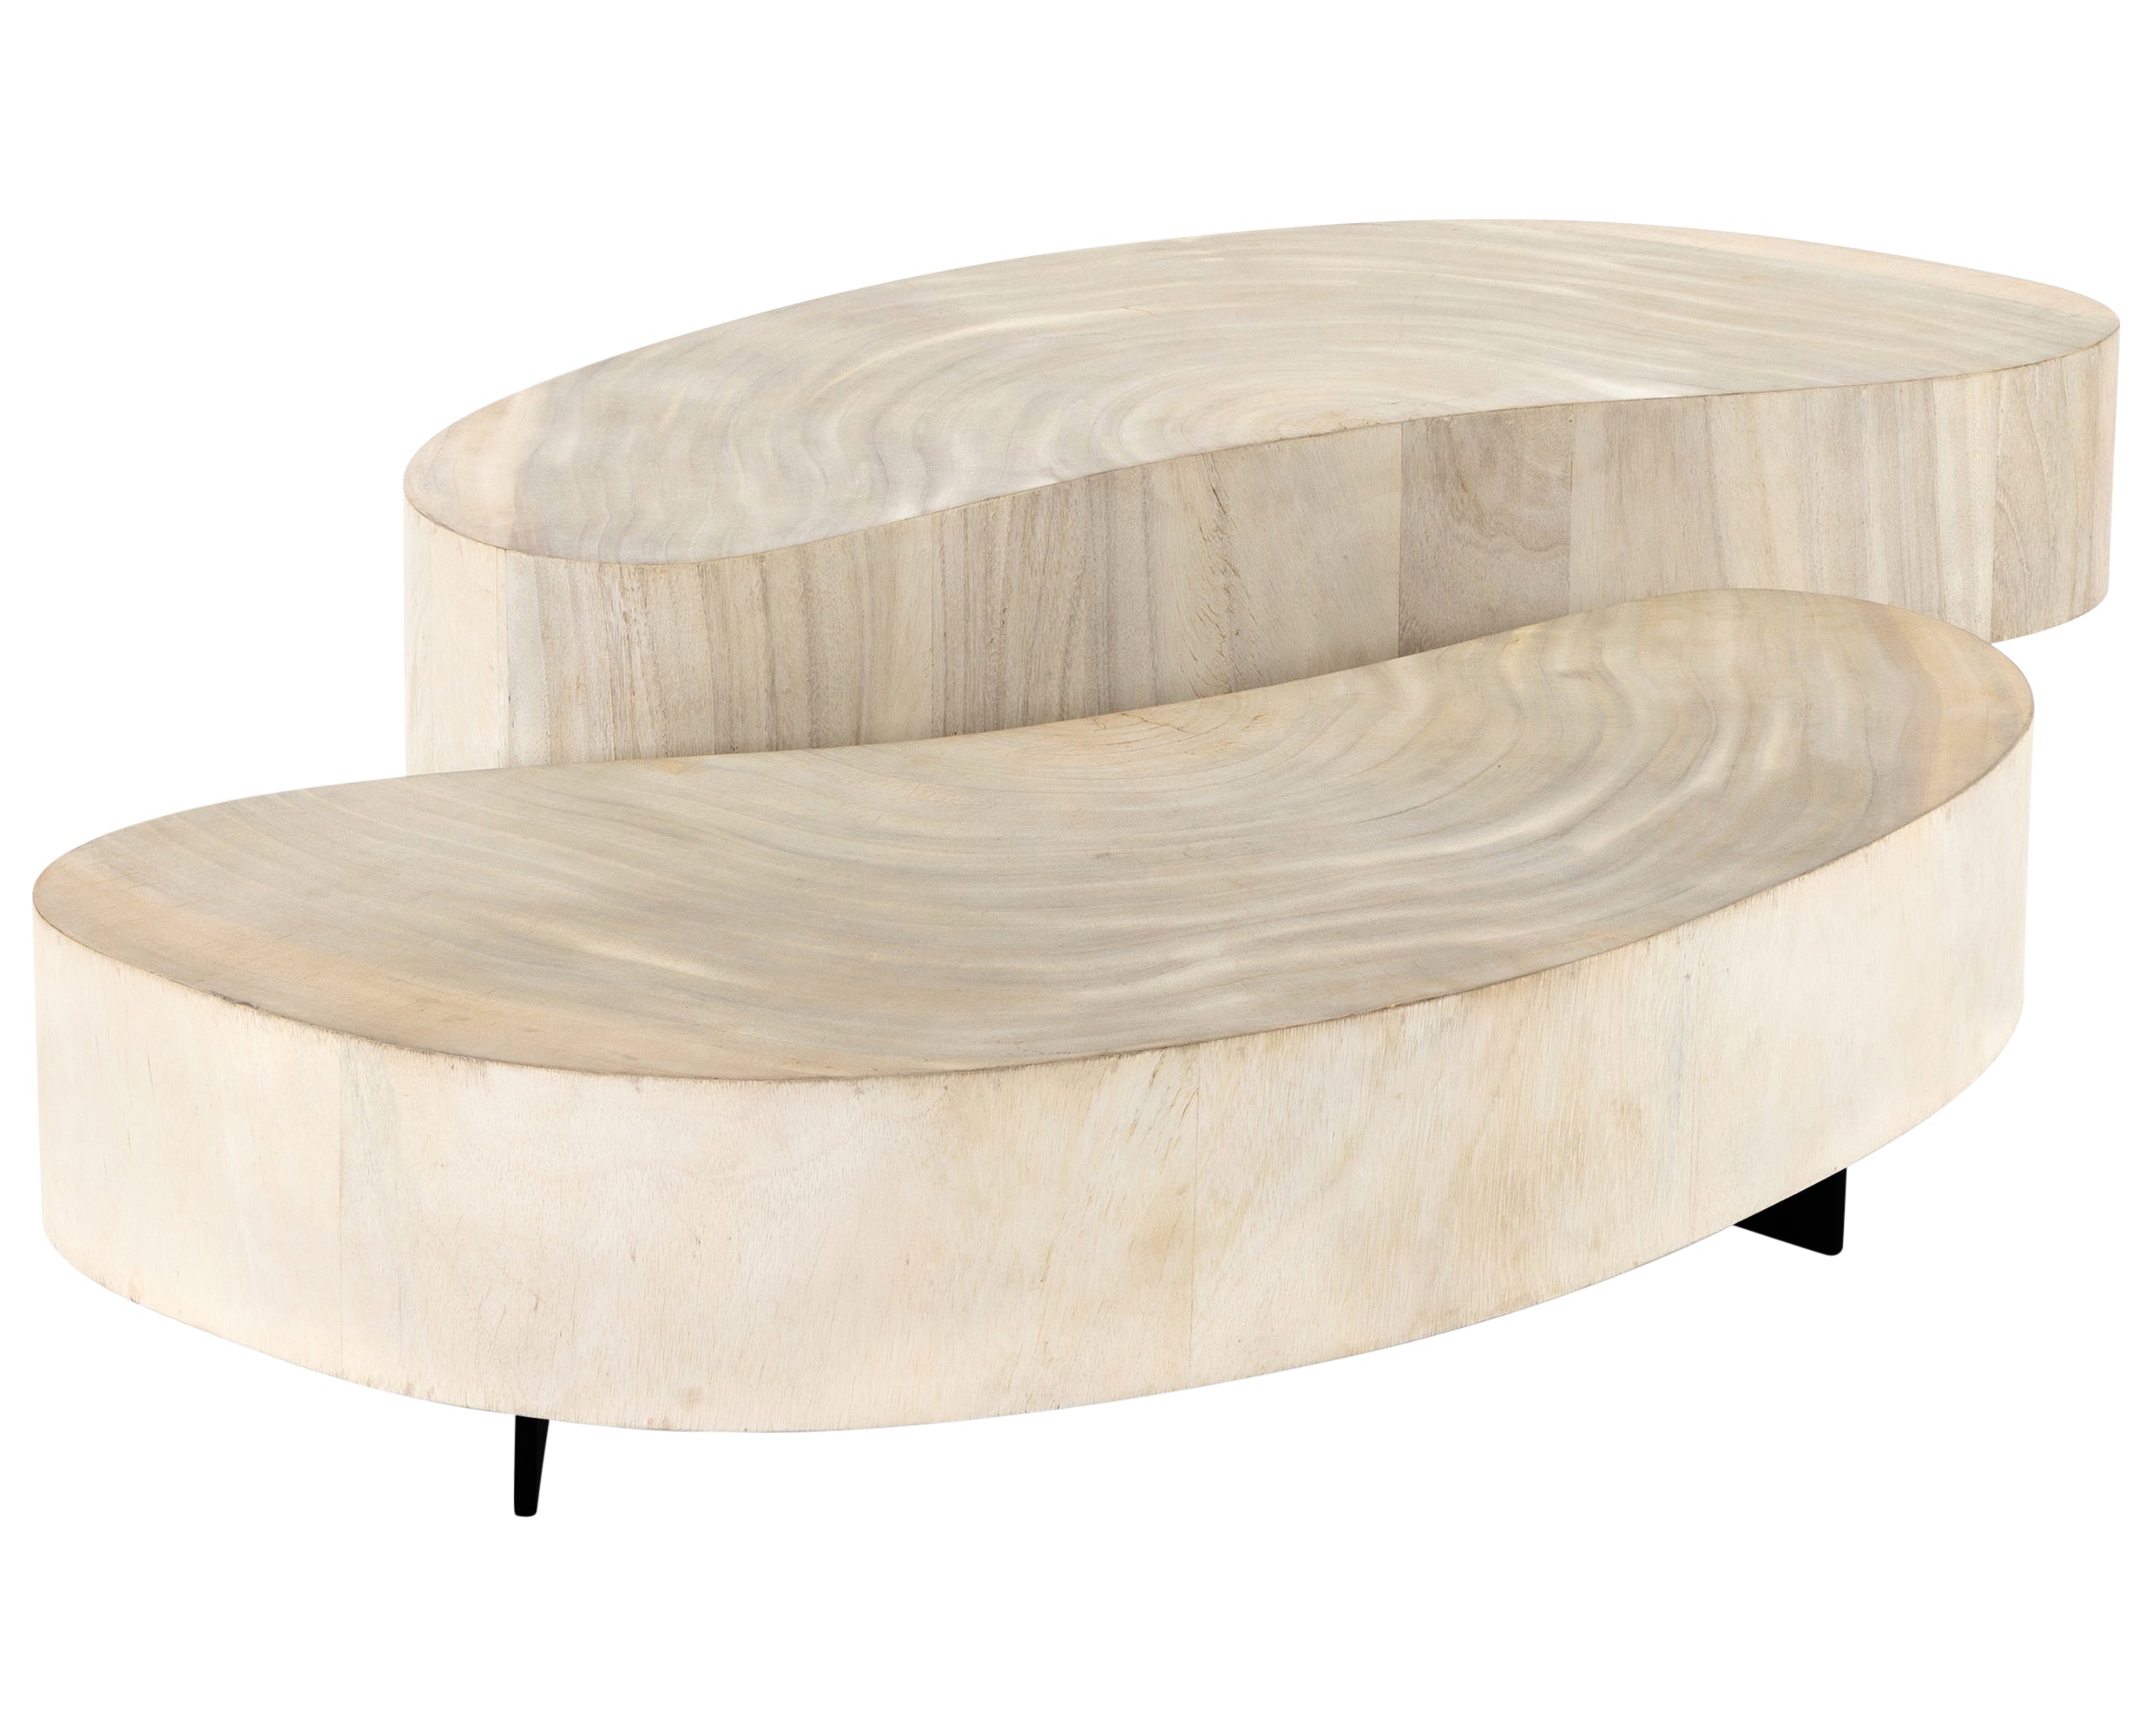 Bleached Guanacaste and Bleached Guanacaste Oyster with Gunmetal Iron | Avett Coffee Table | Valley Ridge Furniture